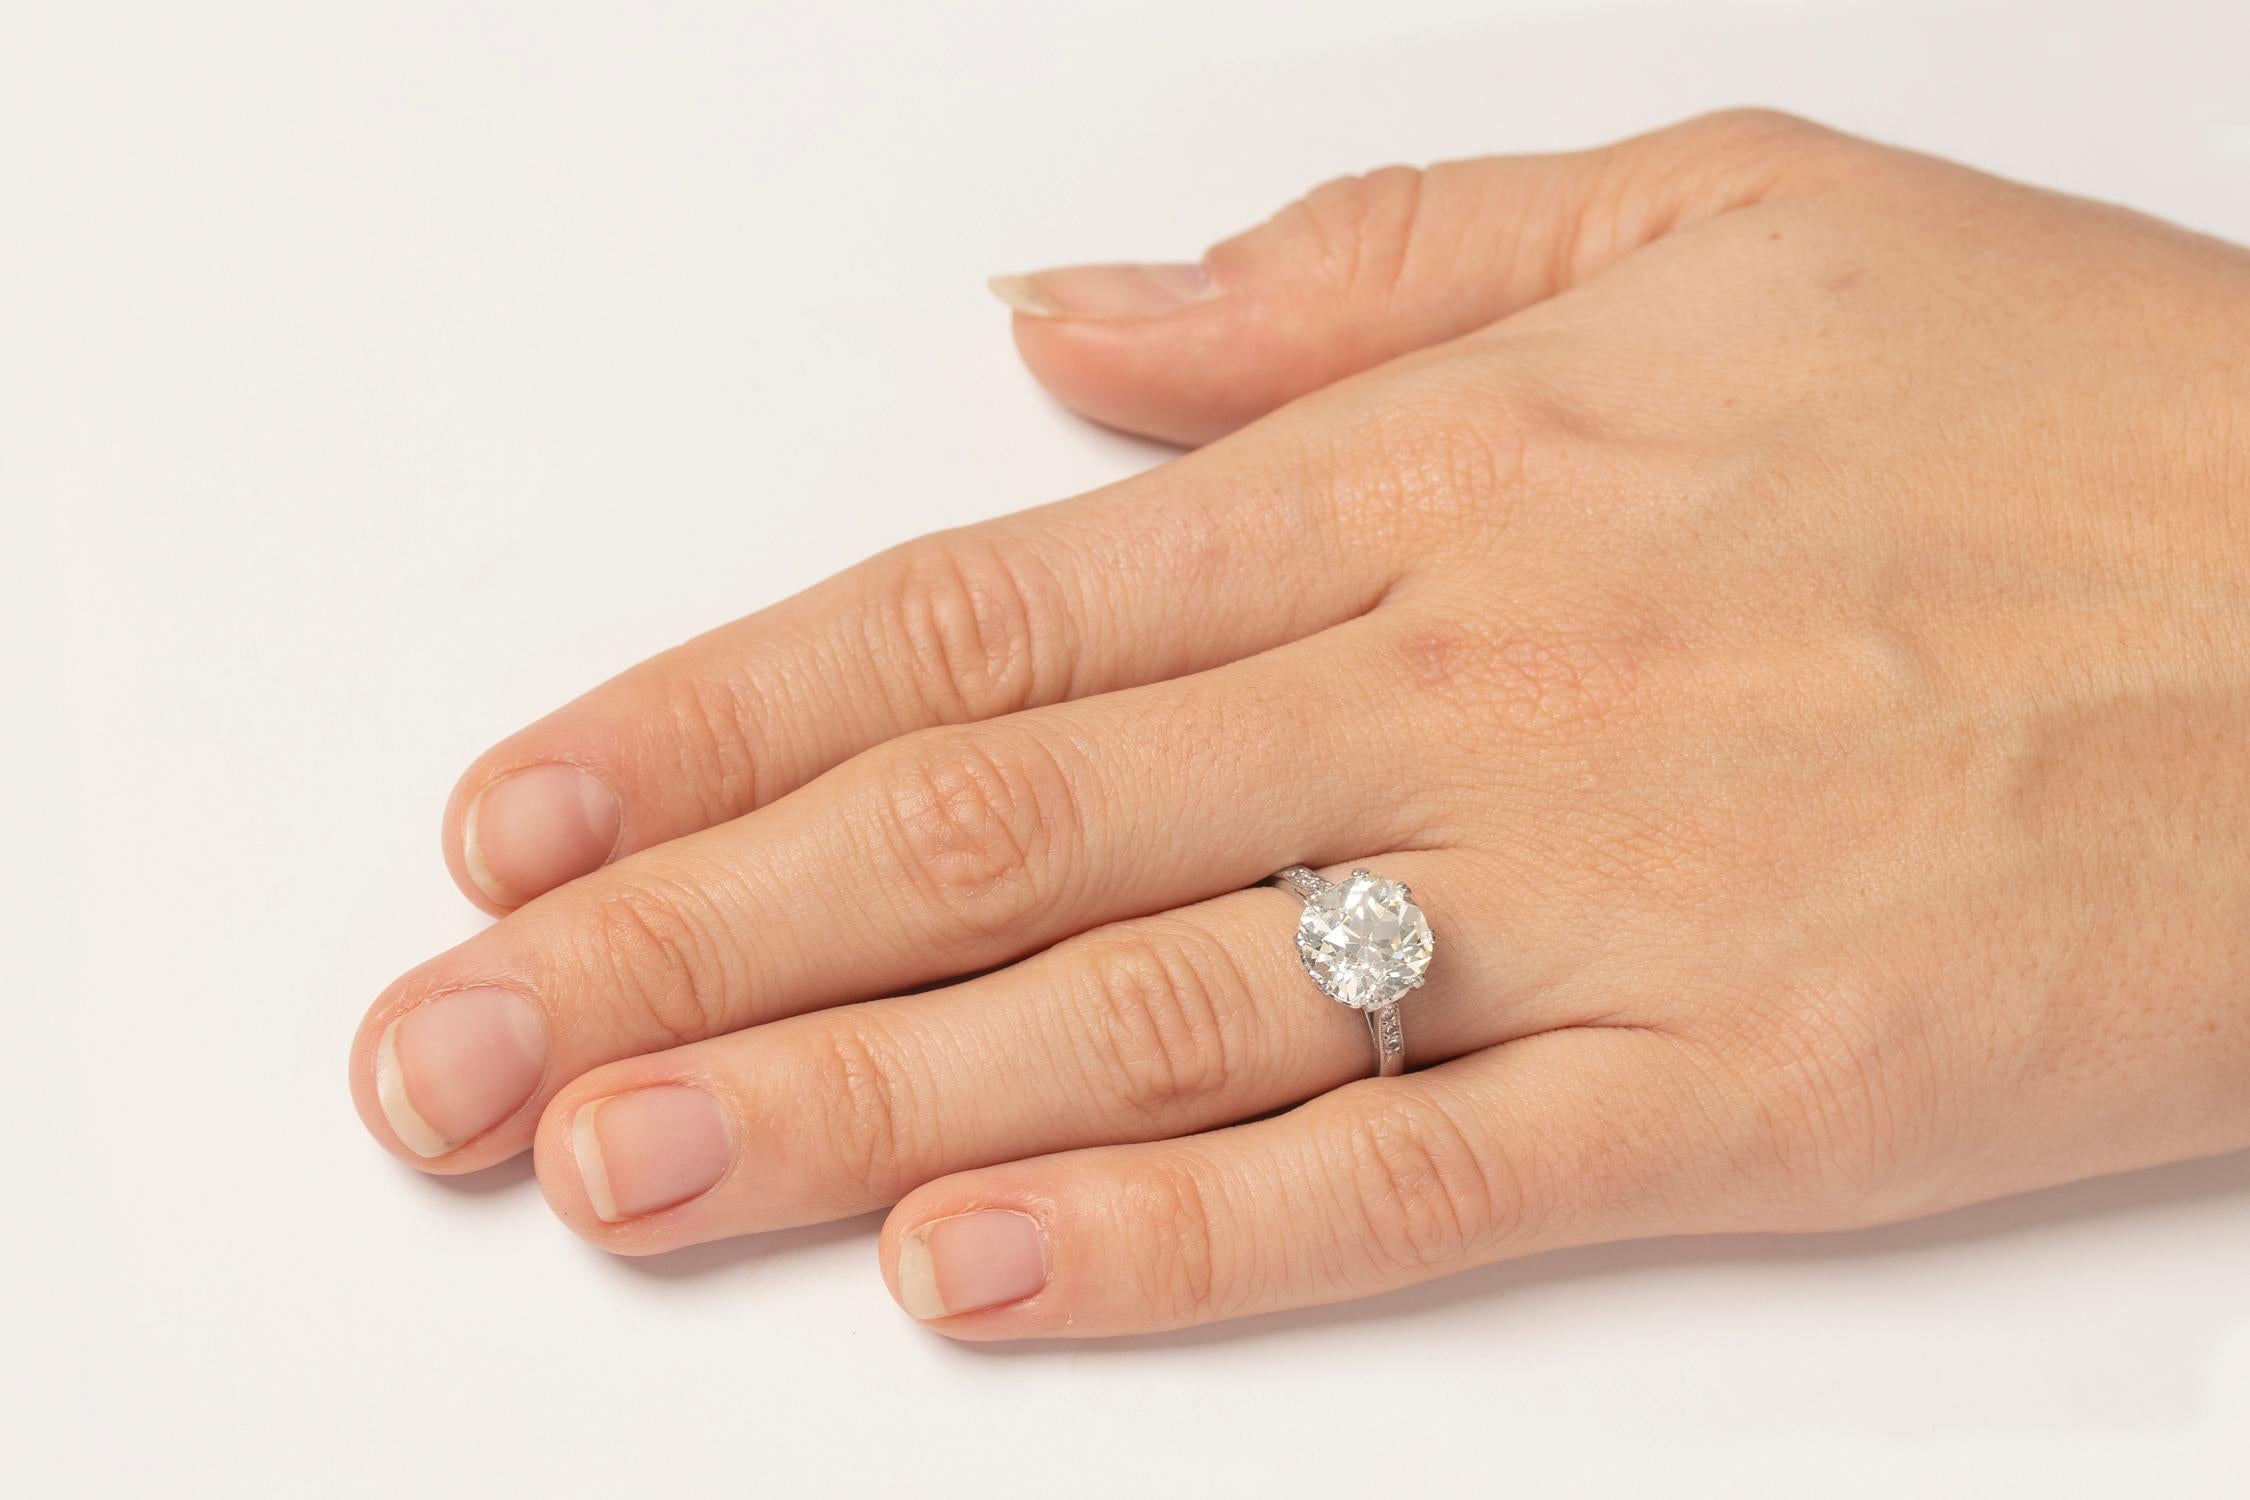 Late Art Deco 4.23 Carat Old Cushion Cut Diamond Engagement Ring, circa 1930s For Sale 3